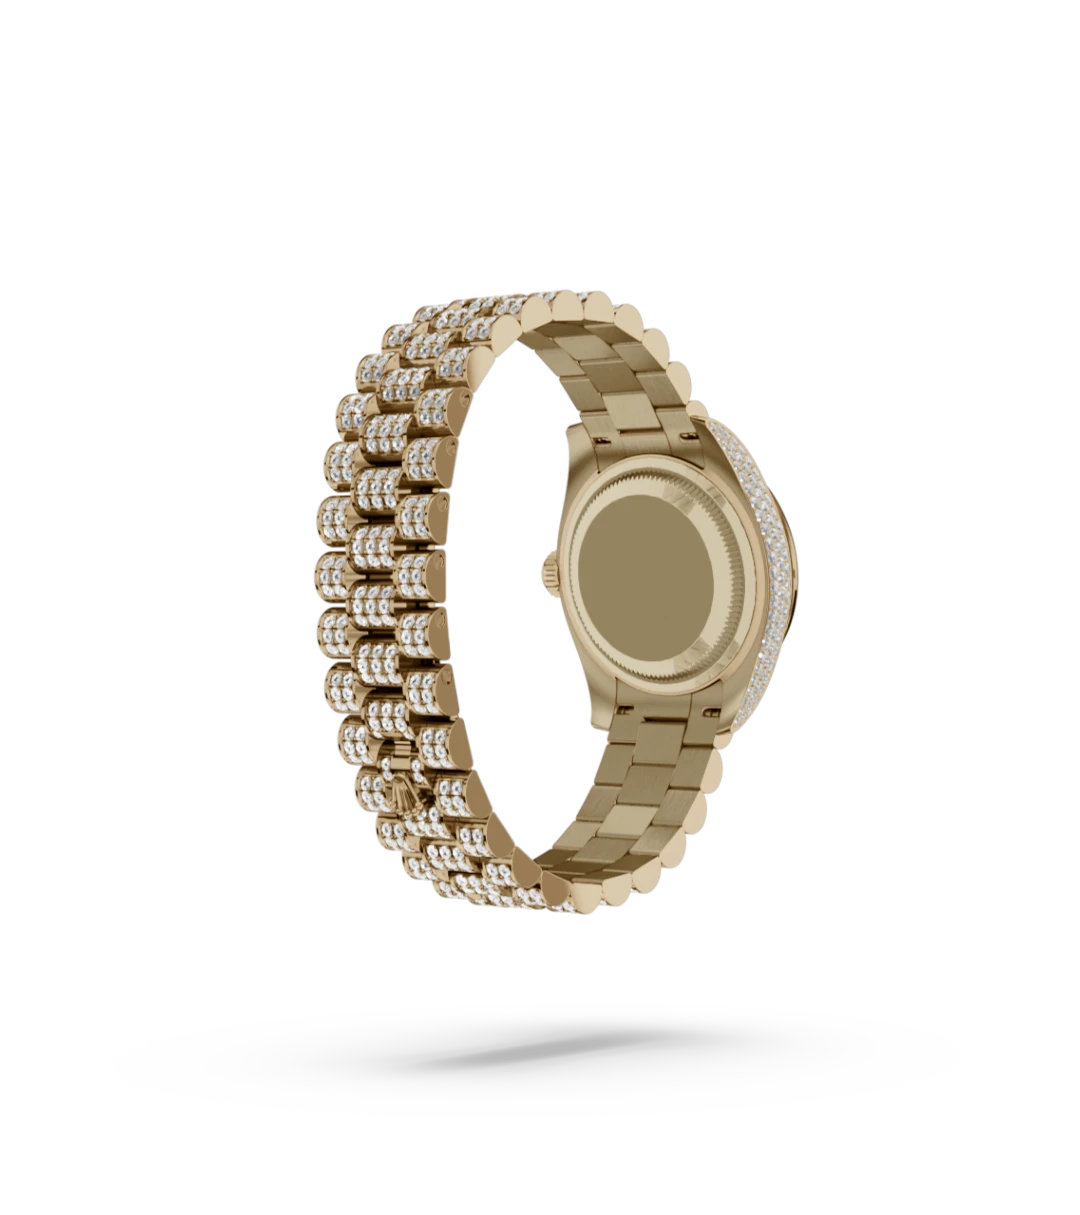 Rolex Lady-Datejust in 18 ct yellow gold with case sides and lugs set with diamonds M279458RBR-0001 at Alsirhan United